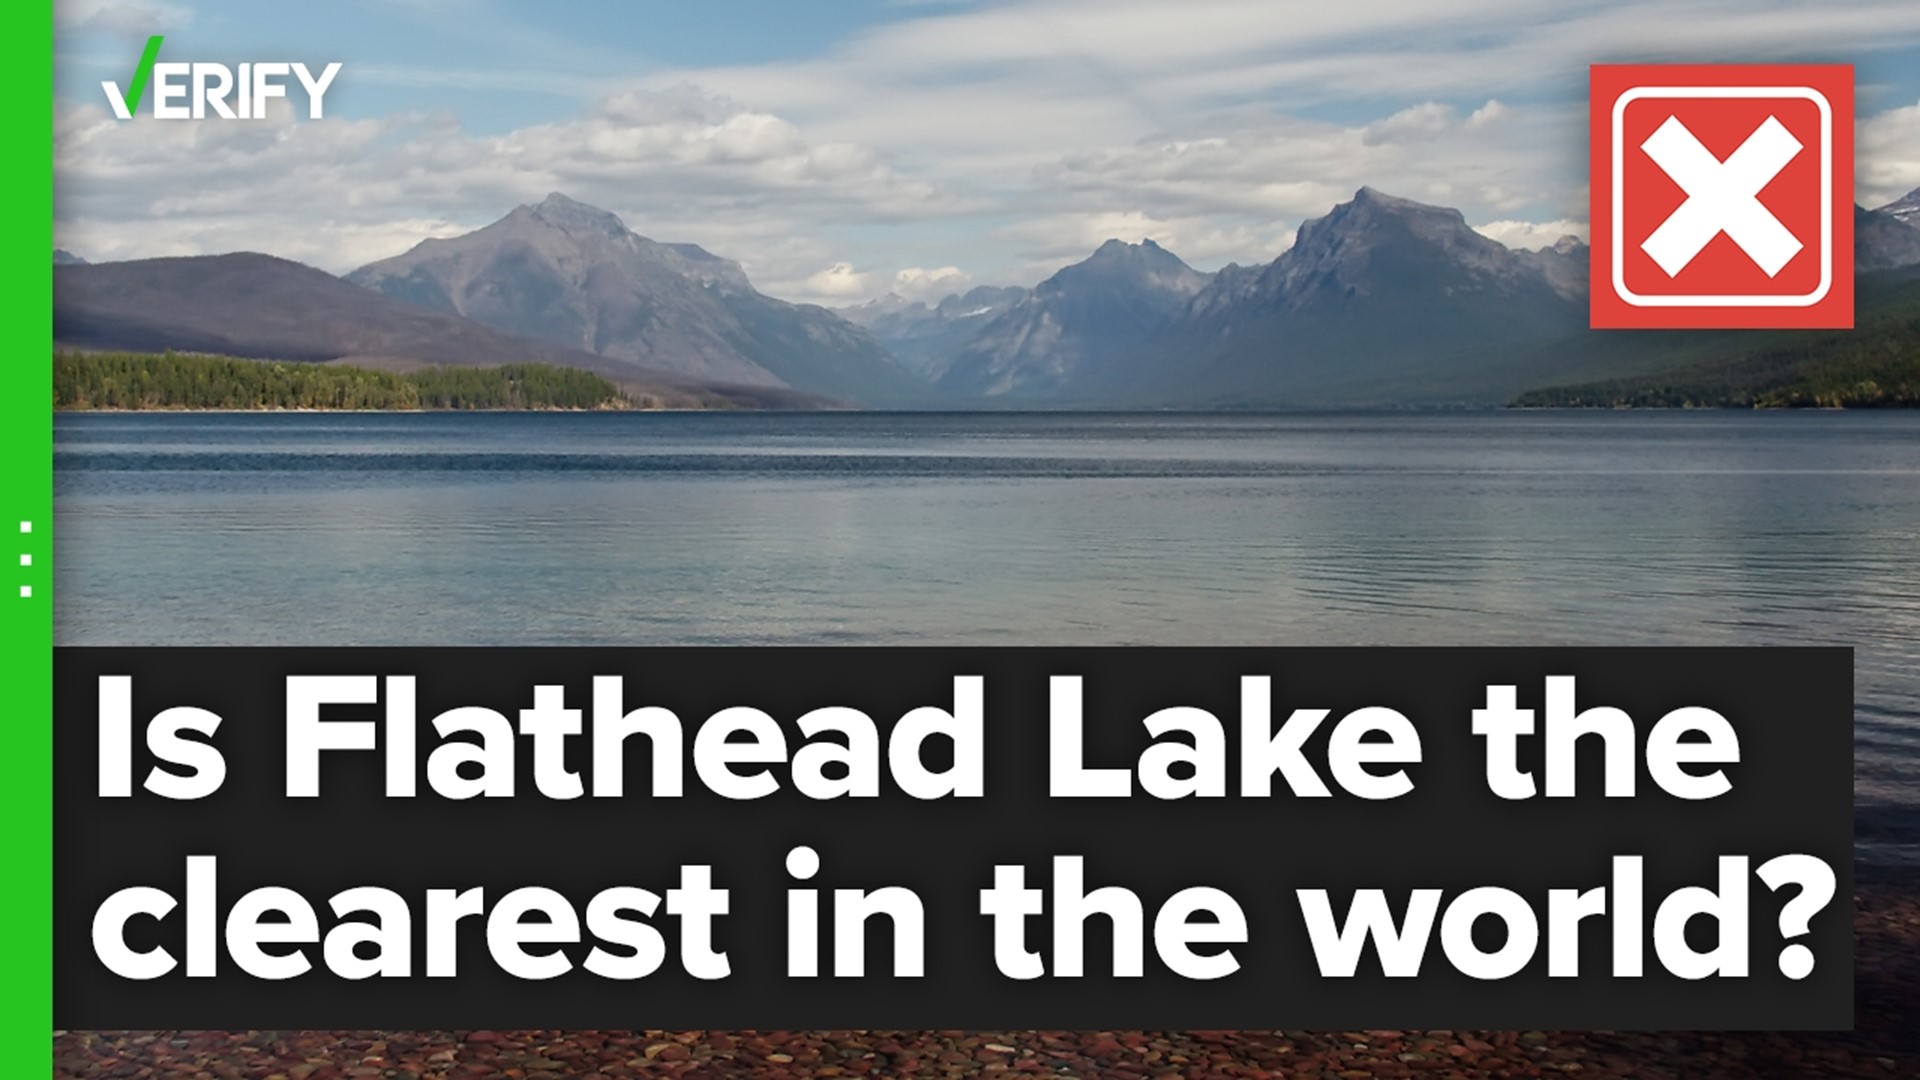 Is Flathead Lake in Montana the clearest water of any lake on Earth?  The VERIFY team confirms this is false.